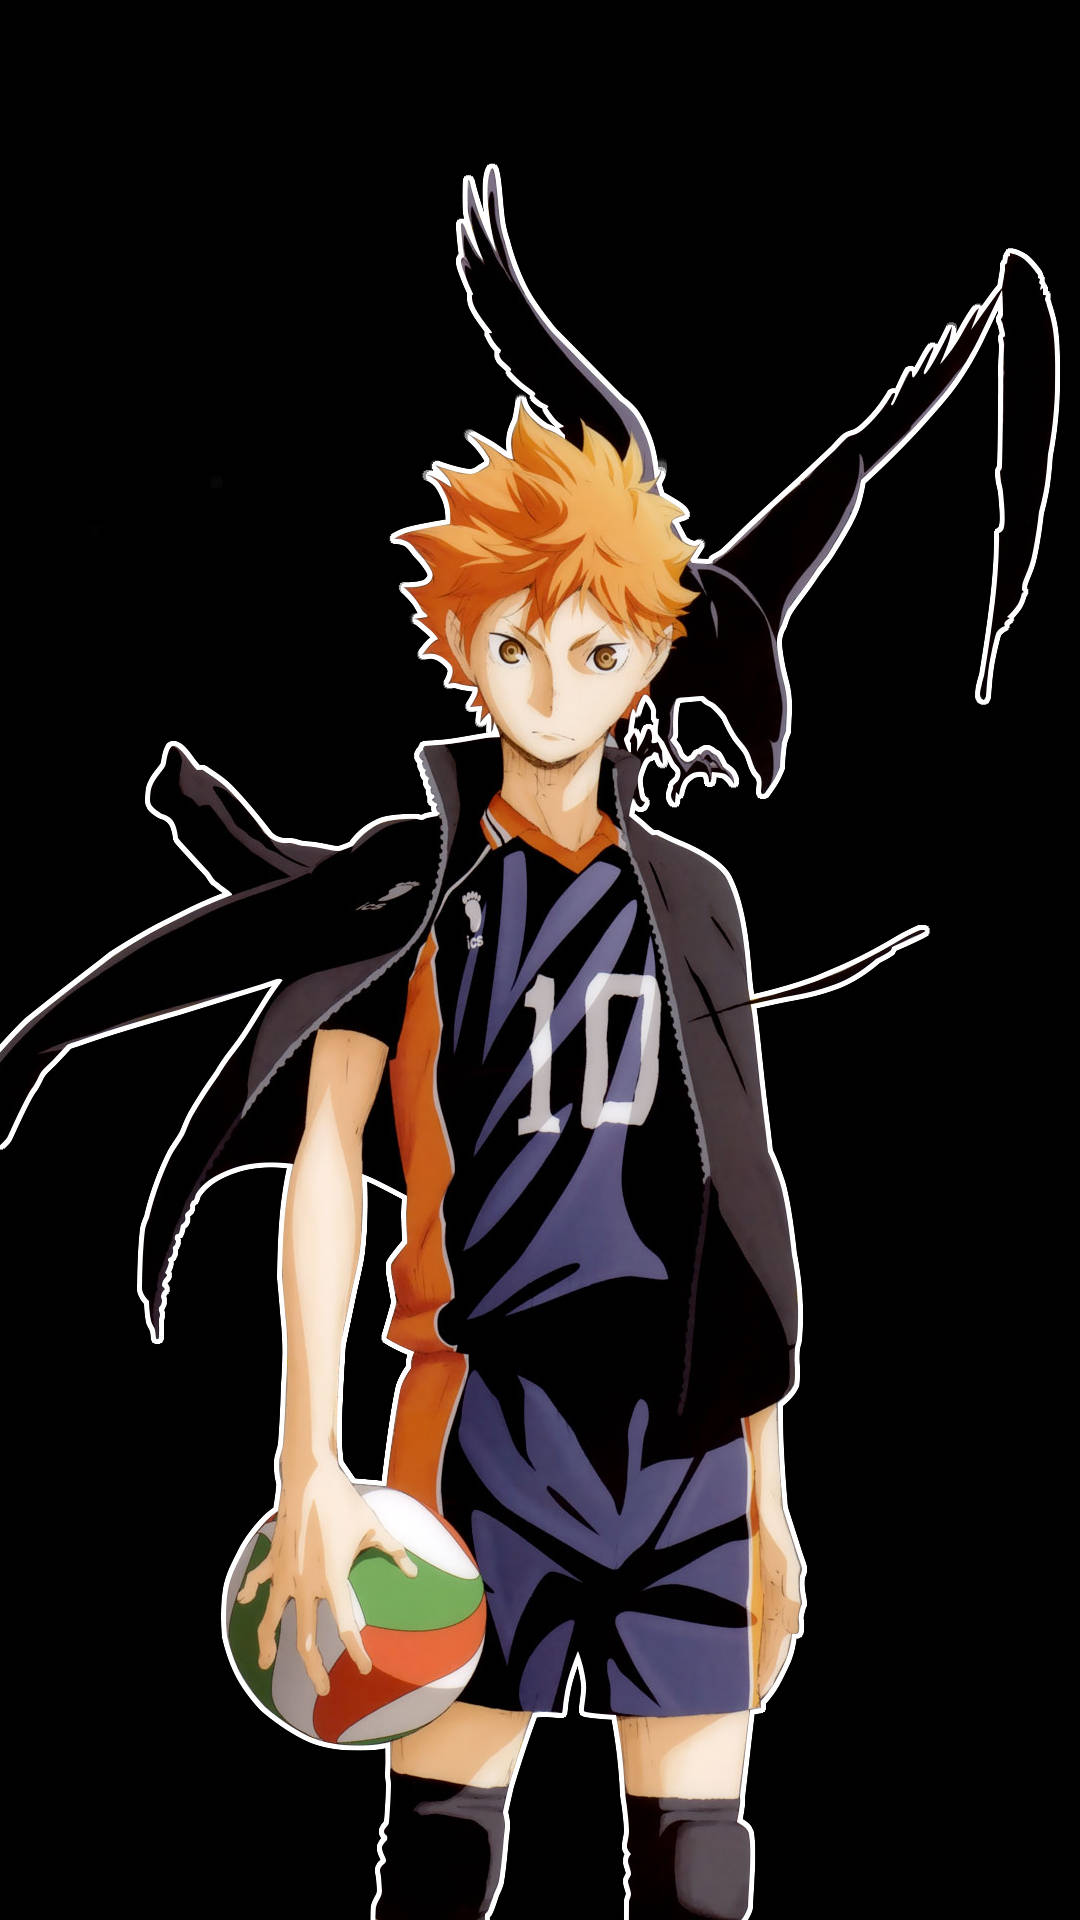 Hitting the spike with all of his soul - Hinata Shouyou. Wallpaper